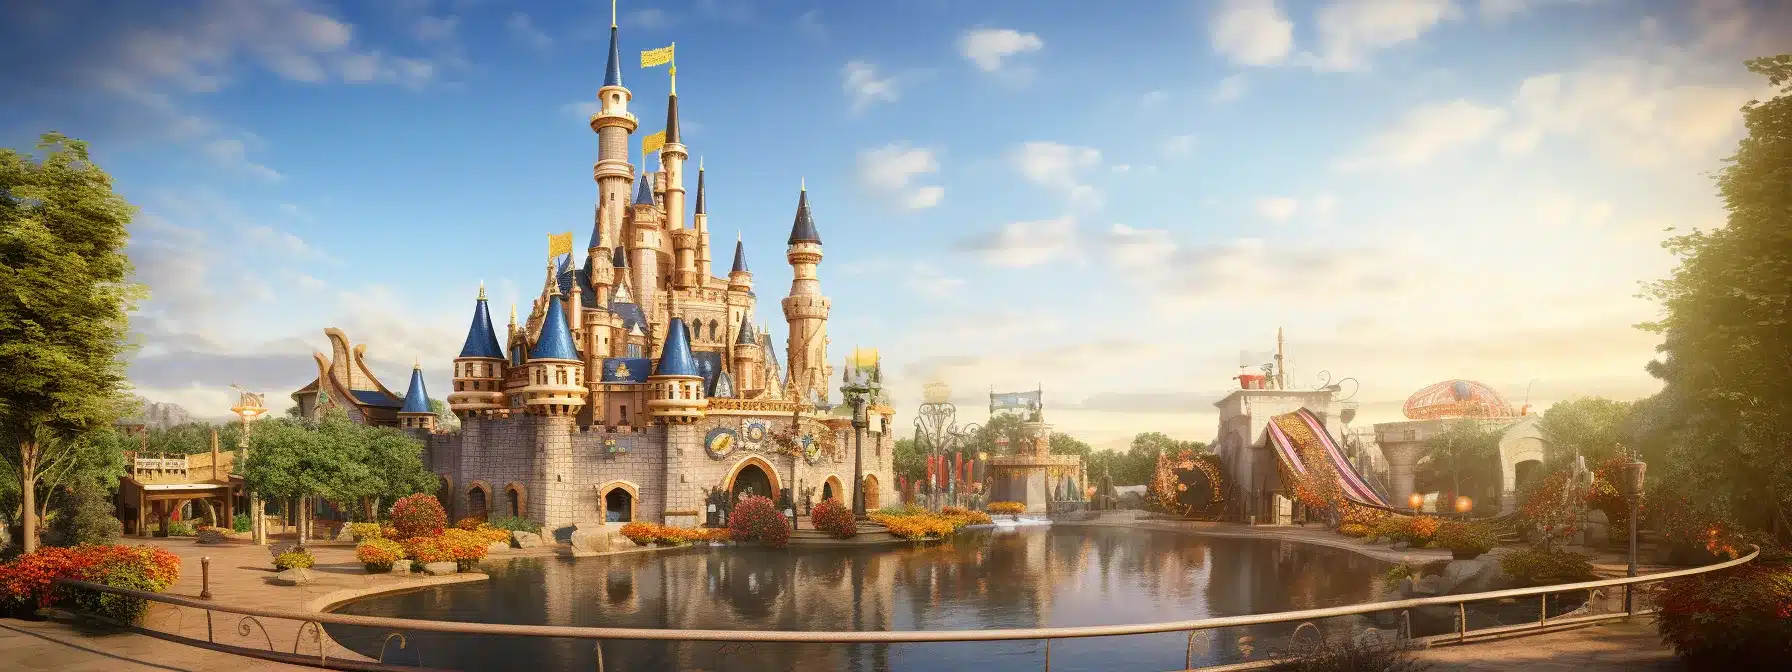 A Theme Park With A Captivating Roller Coaster Surrounded By A Fairy-Tale Castle And Welcoming Gate.